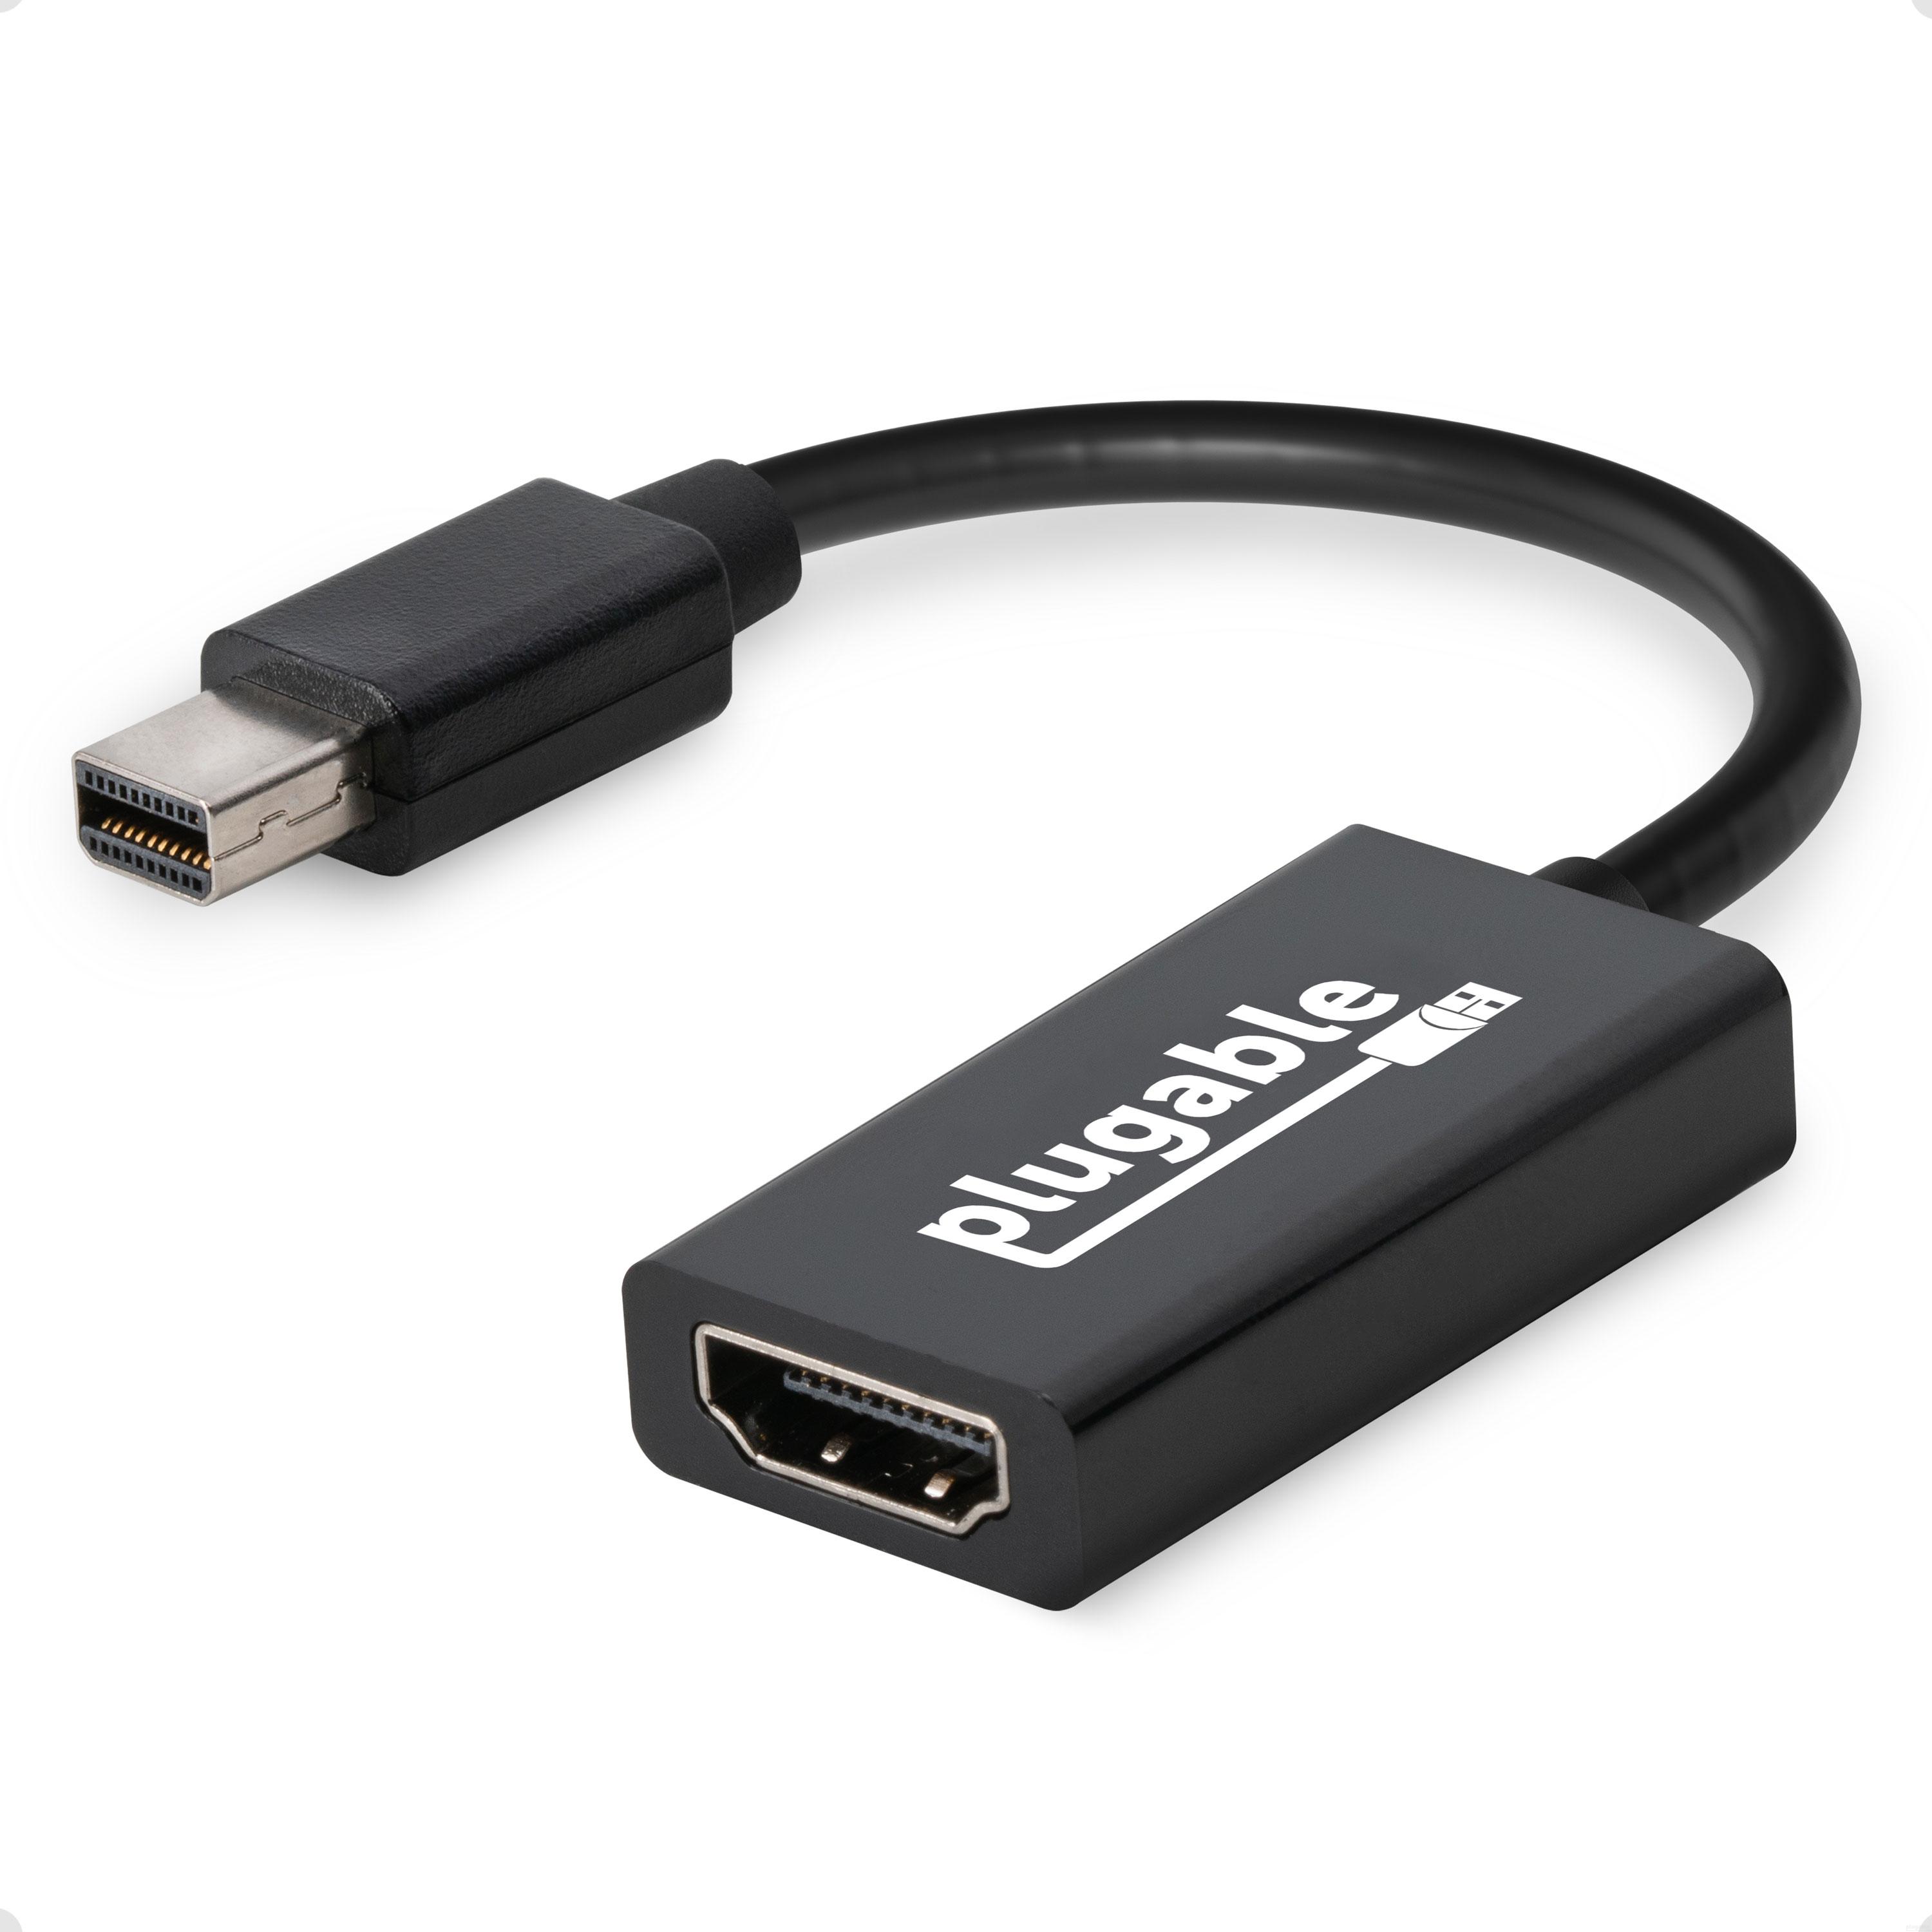 Plugable Mini DisplayPort/Thunderbolt 2 to HDMI 2.0 Adapter for Older Macs and Surface PCs with MDP Ports - Driverless - image 1 of 7